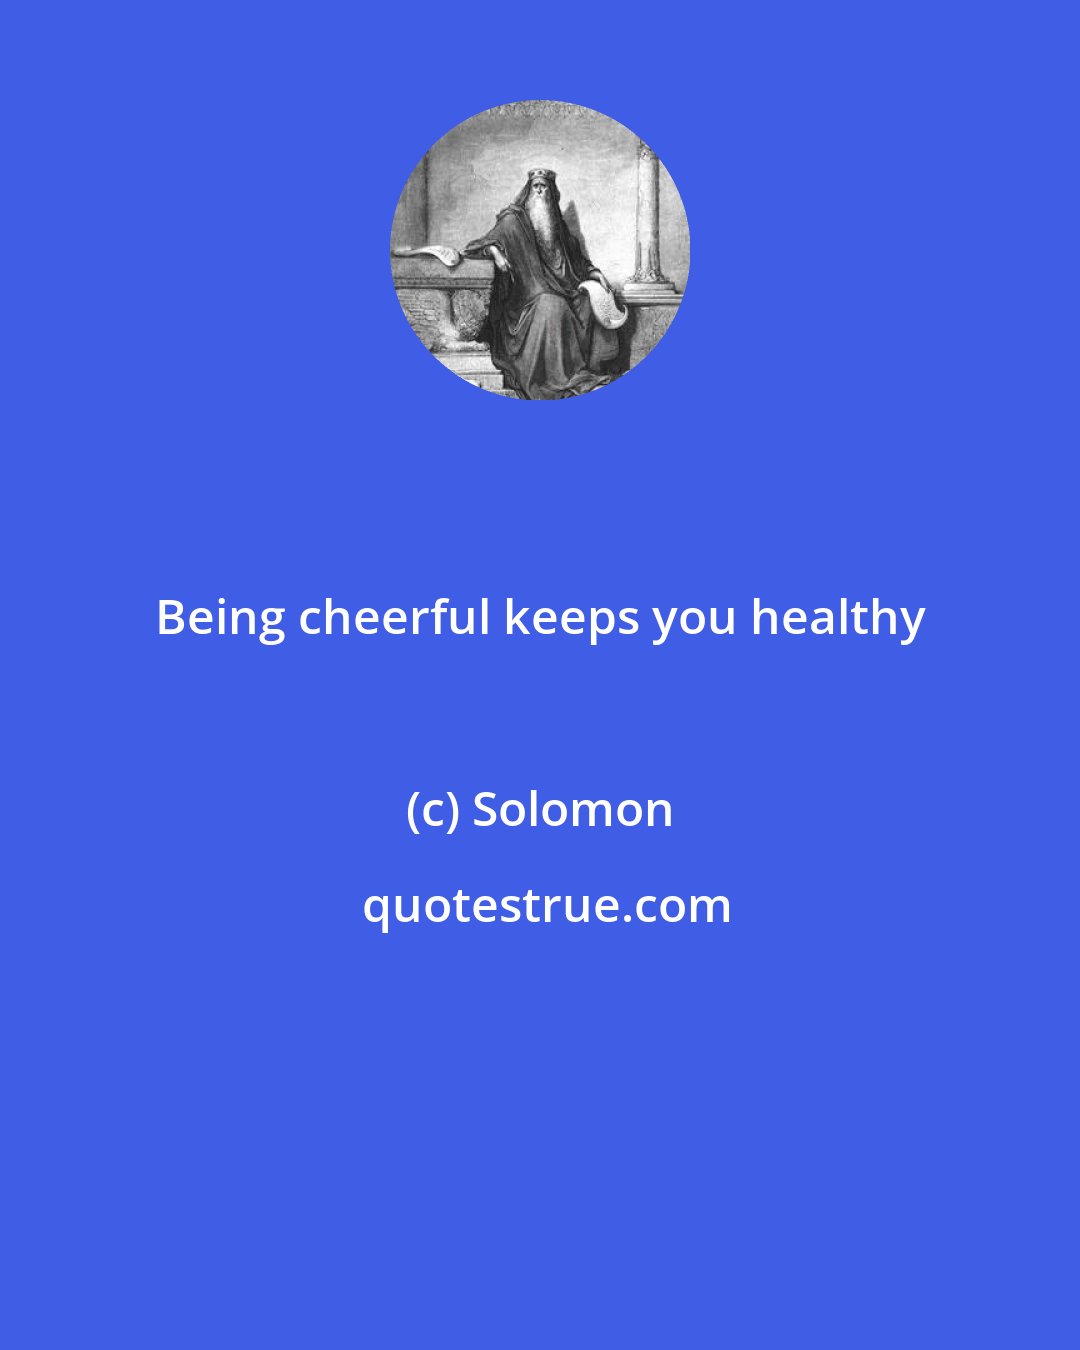 Solomon: Being cheerful keeps you healthy